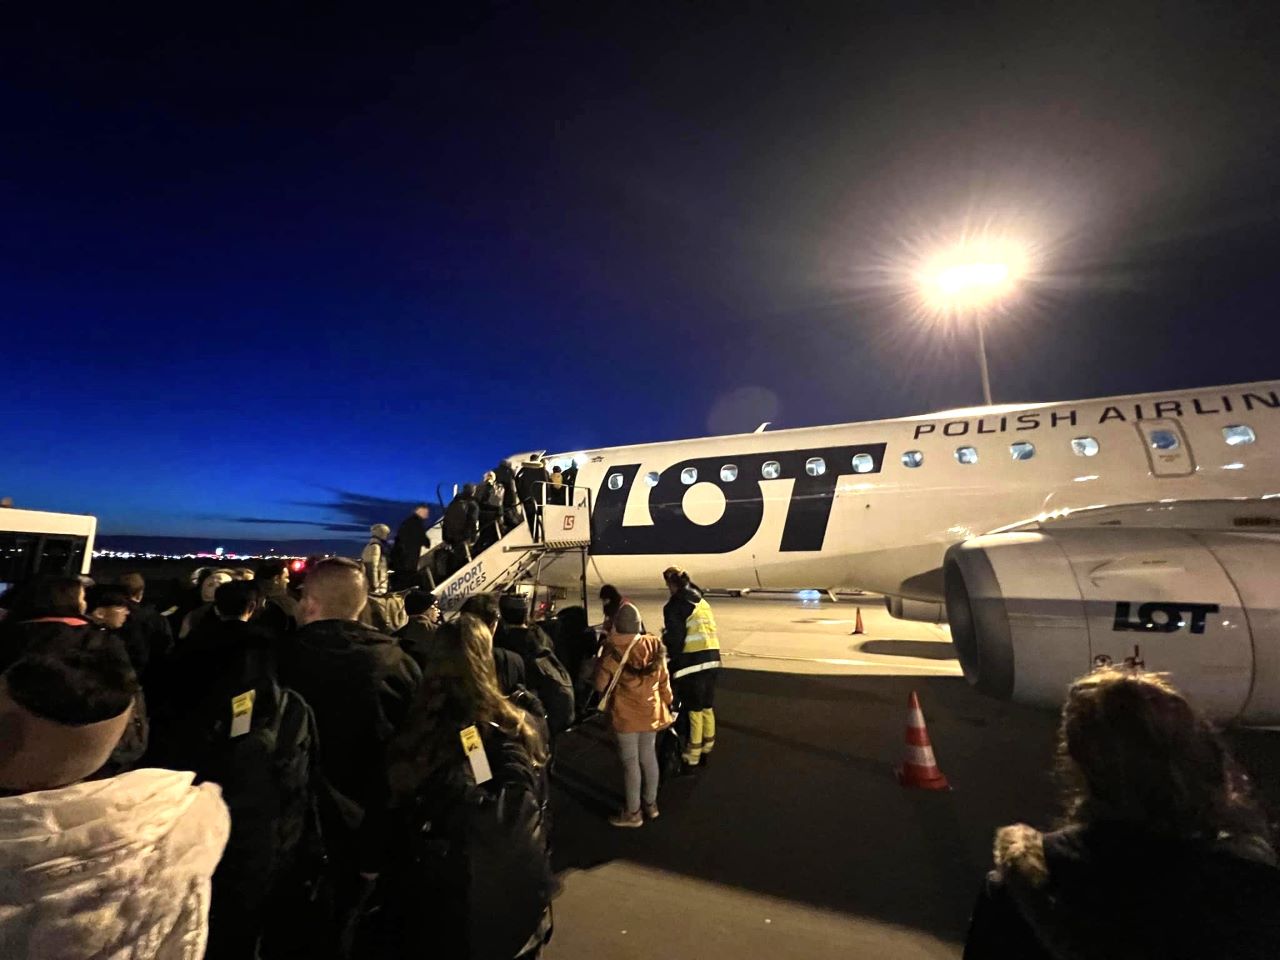 Lot Polish Airlines Airplane